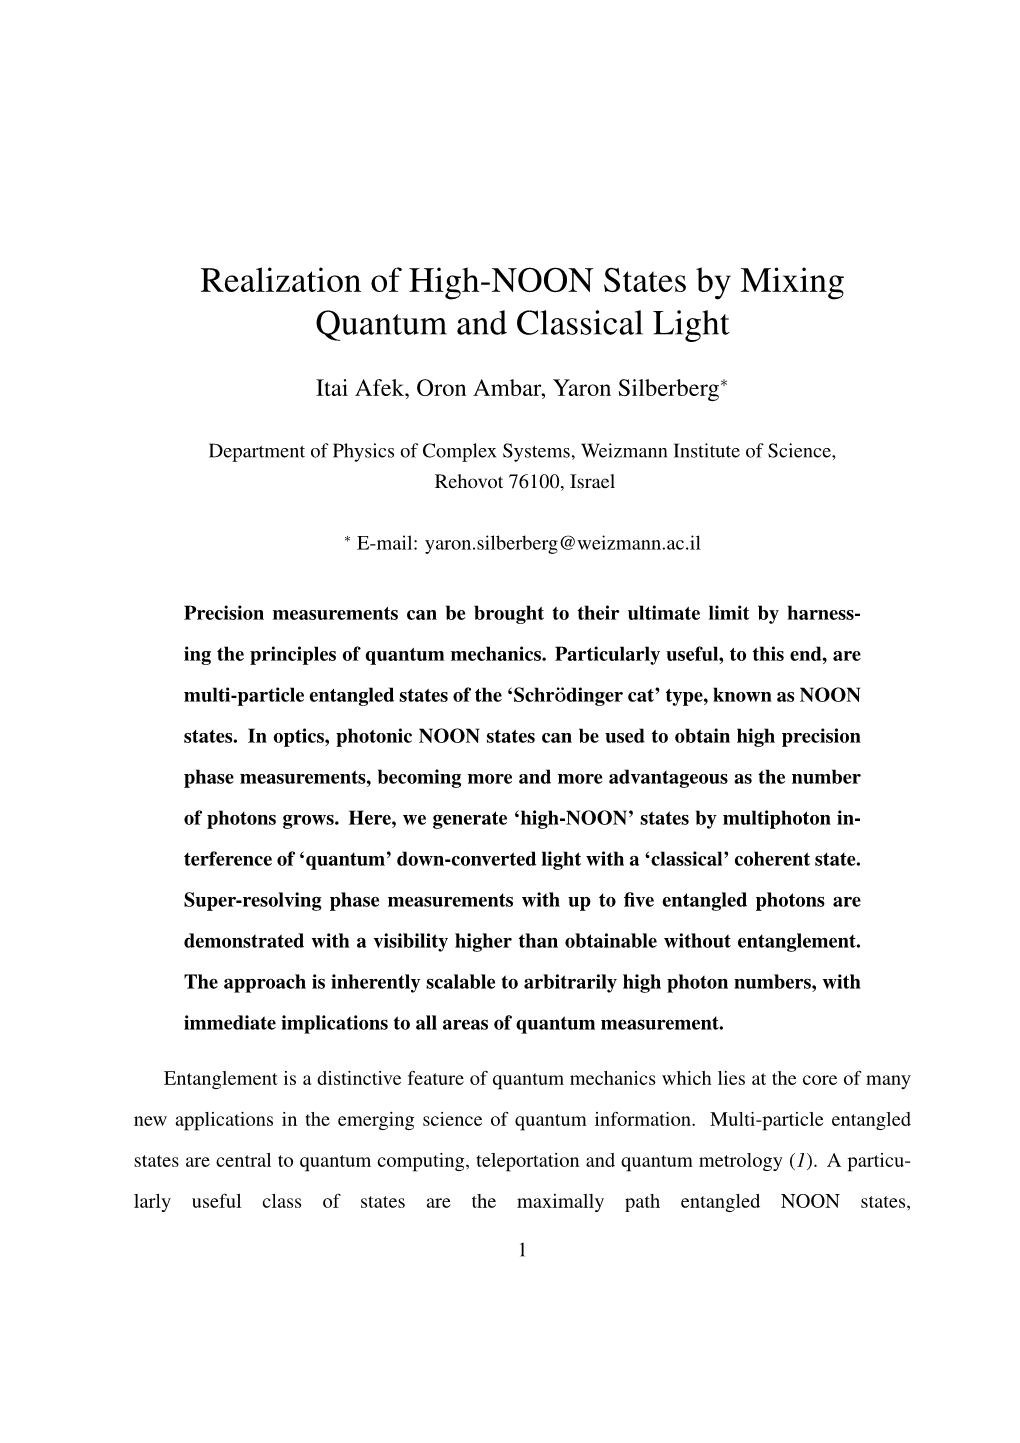 Realization of High-NOON States by Mixing Quantum and Classical Light